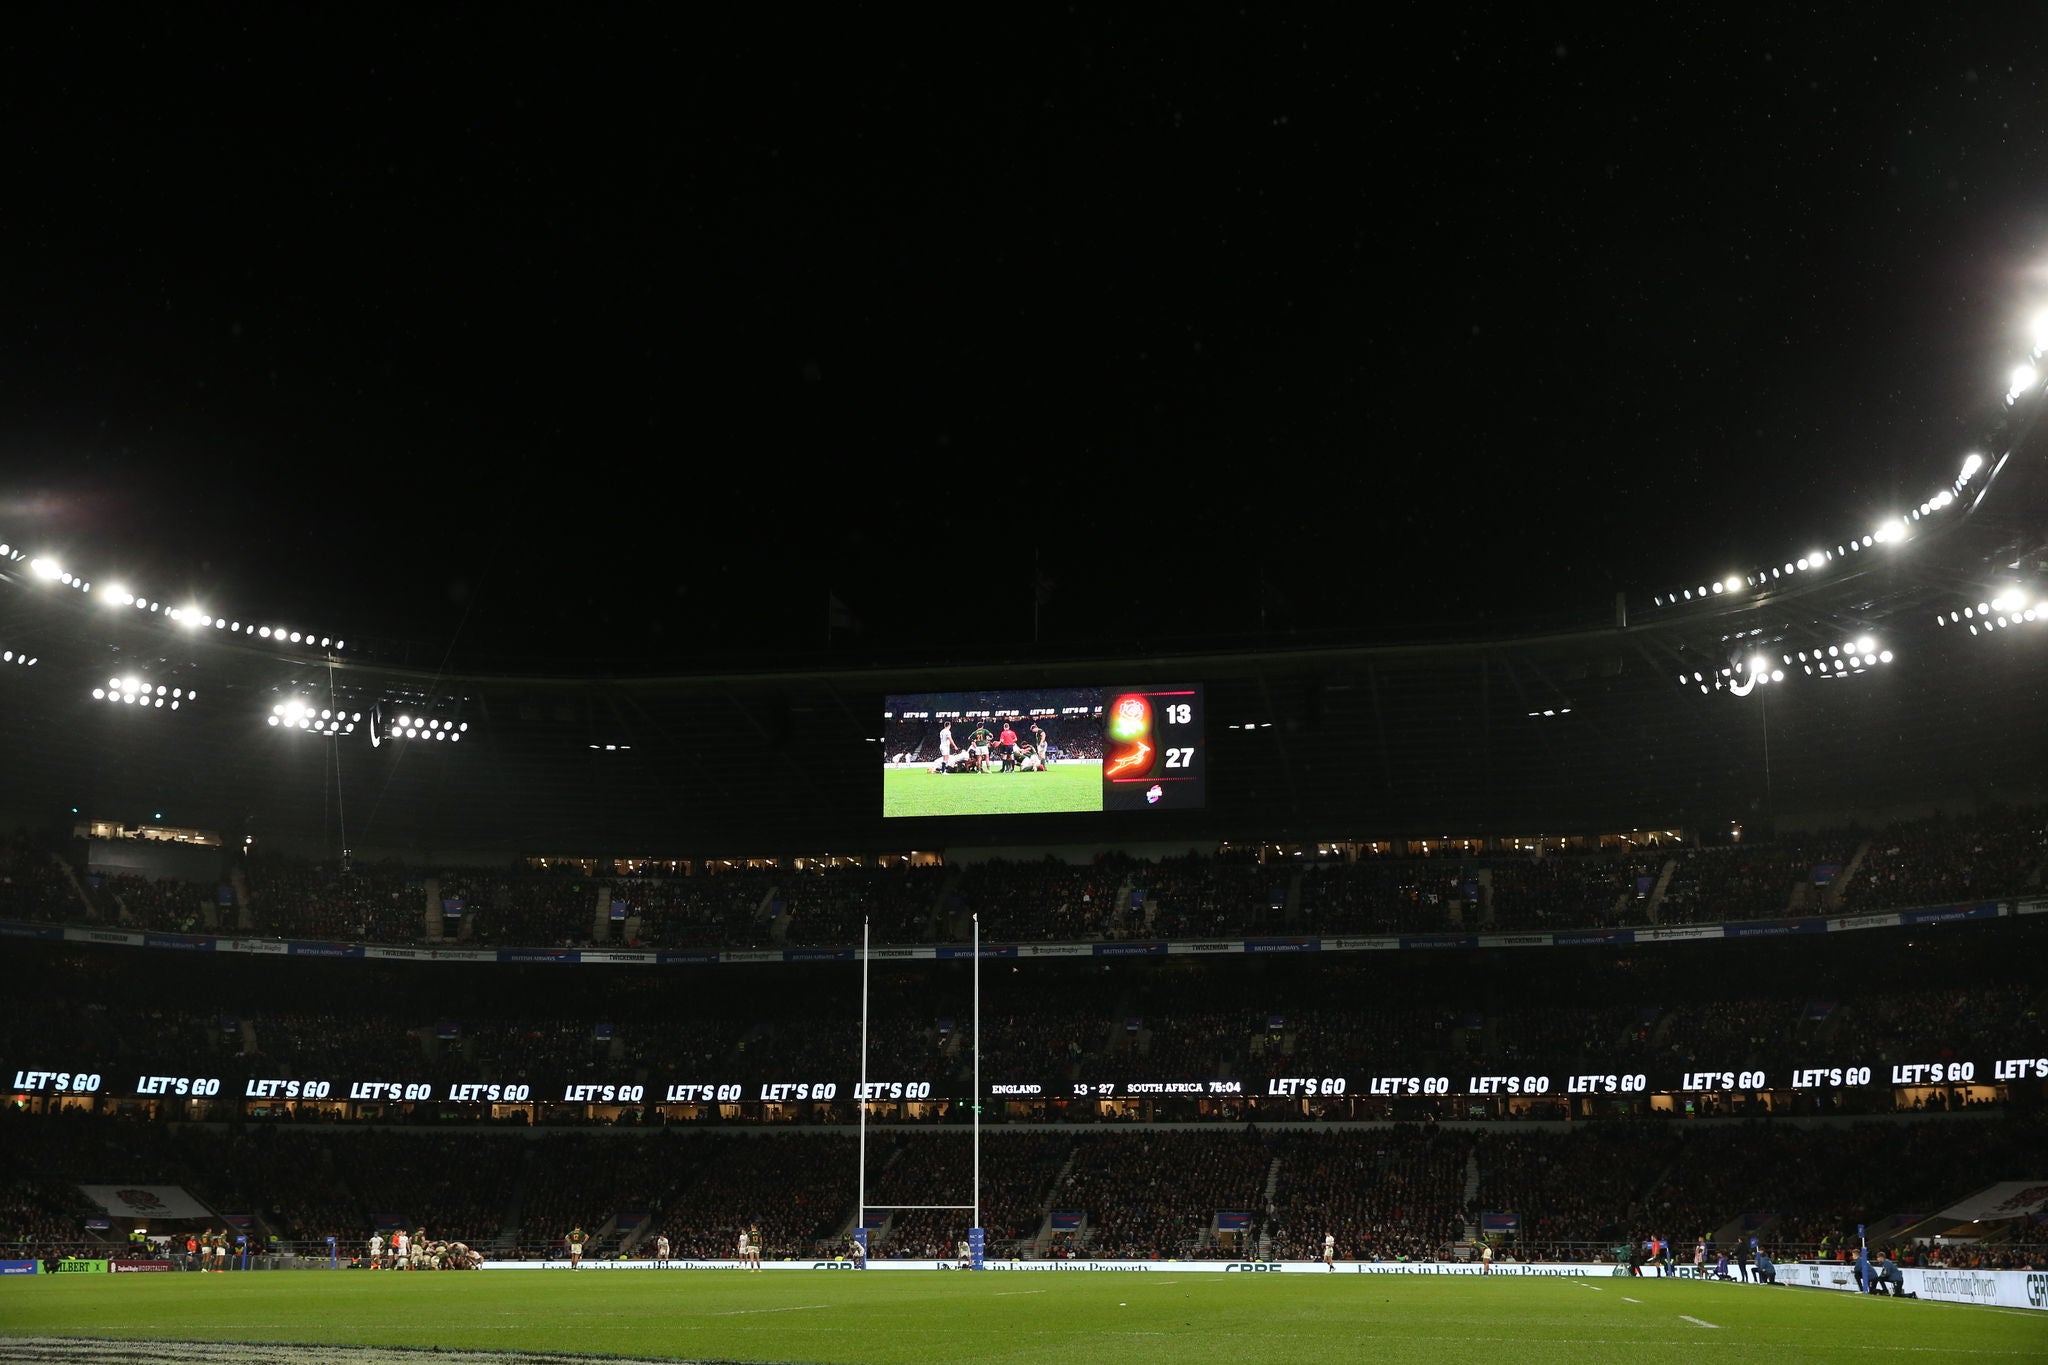 LONDON, ENGLAND - NOVEMBER 26: General view  during the Autumn International match between England and South Africa at Twickenham Stadium on November 26, 2022 in London, England. (Photo by Steve Bardens - RFU/The RFU Collection via Getty Images)